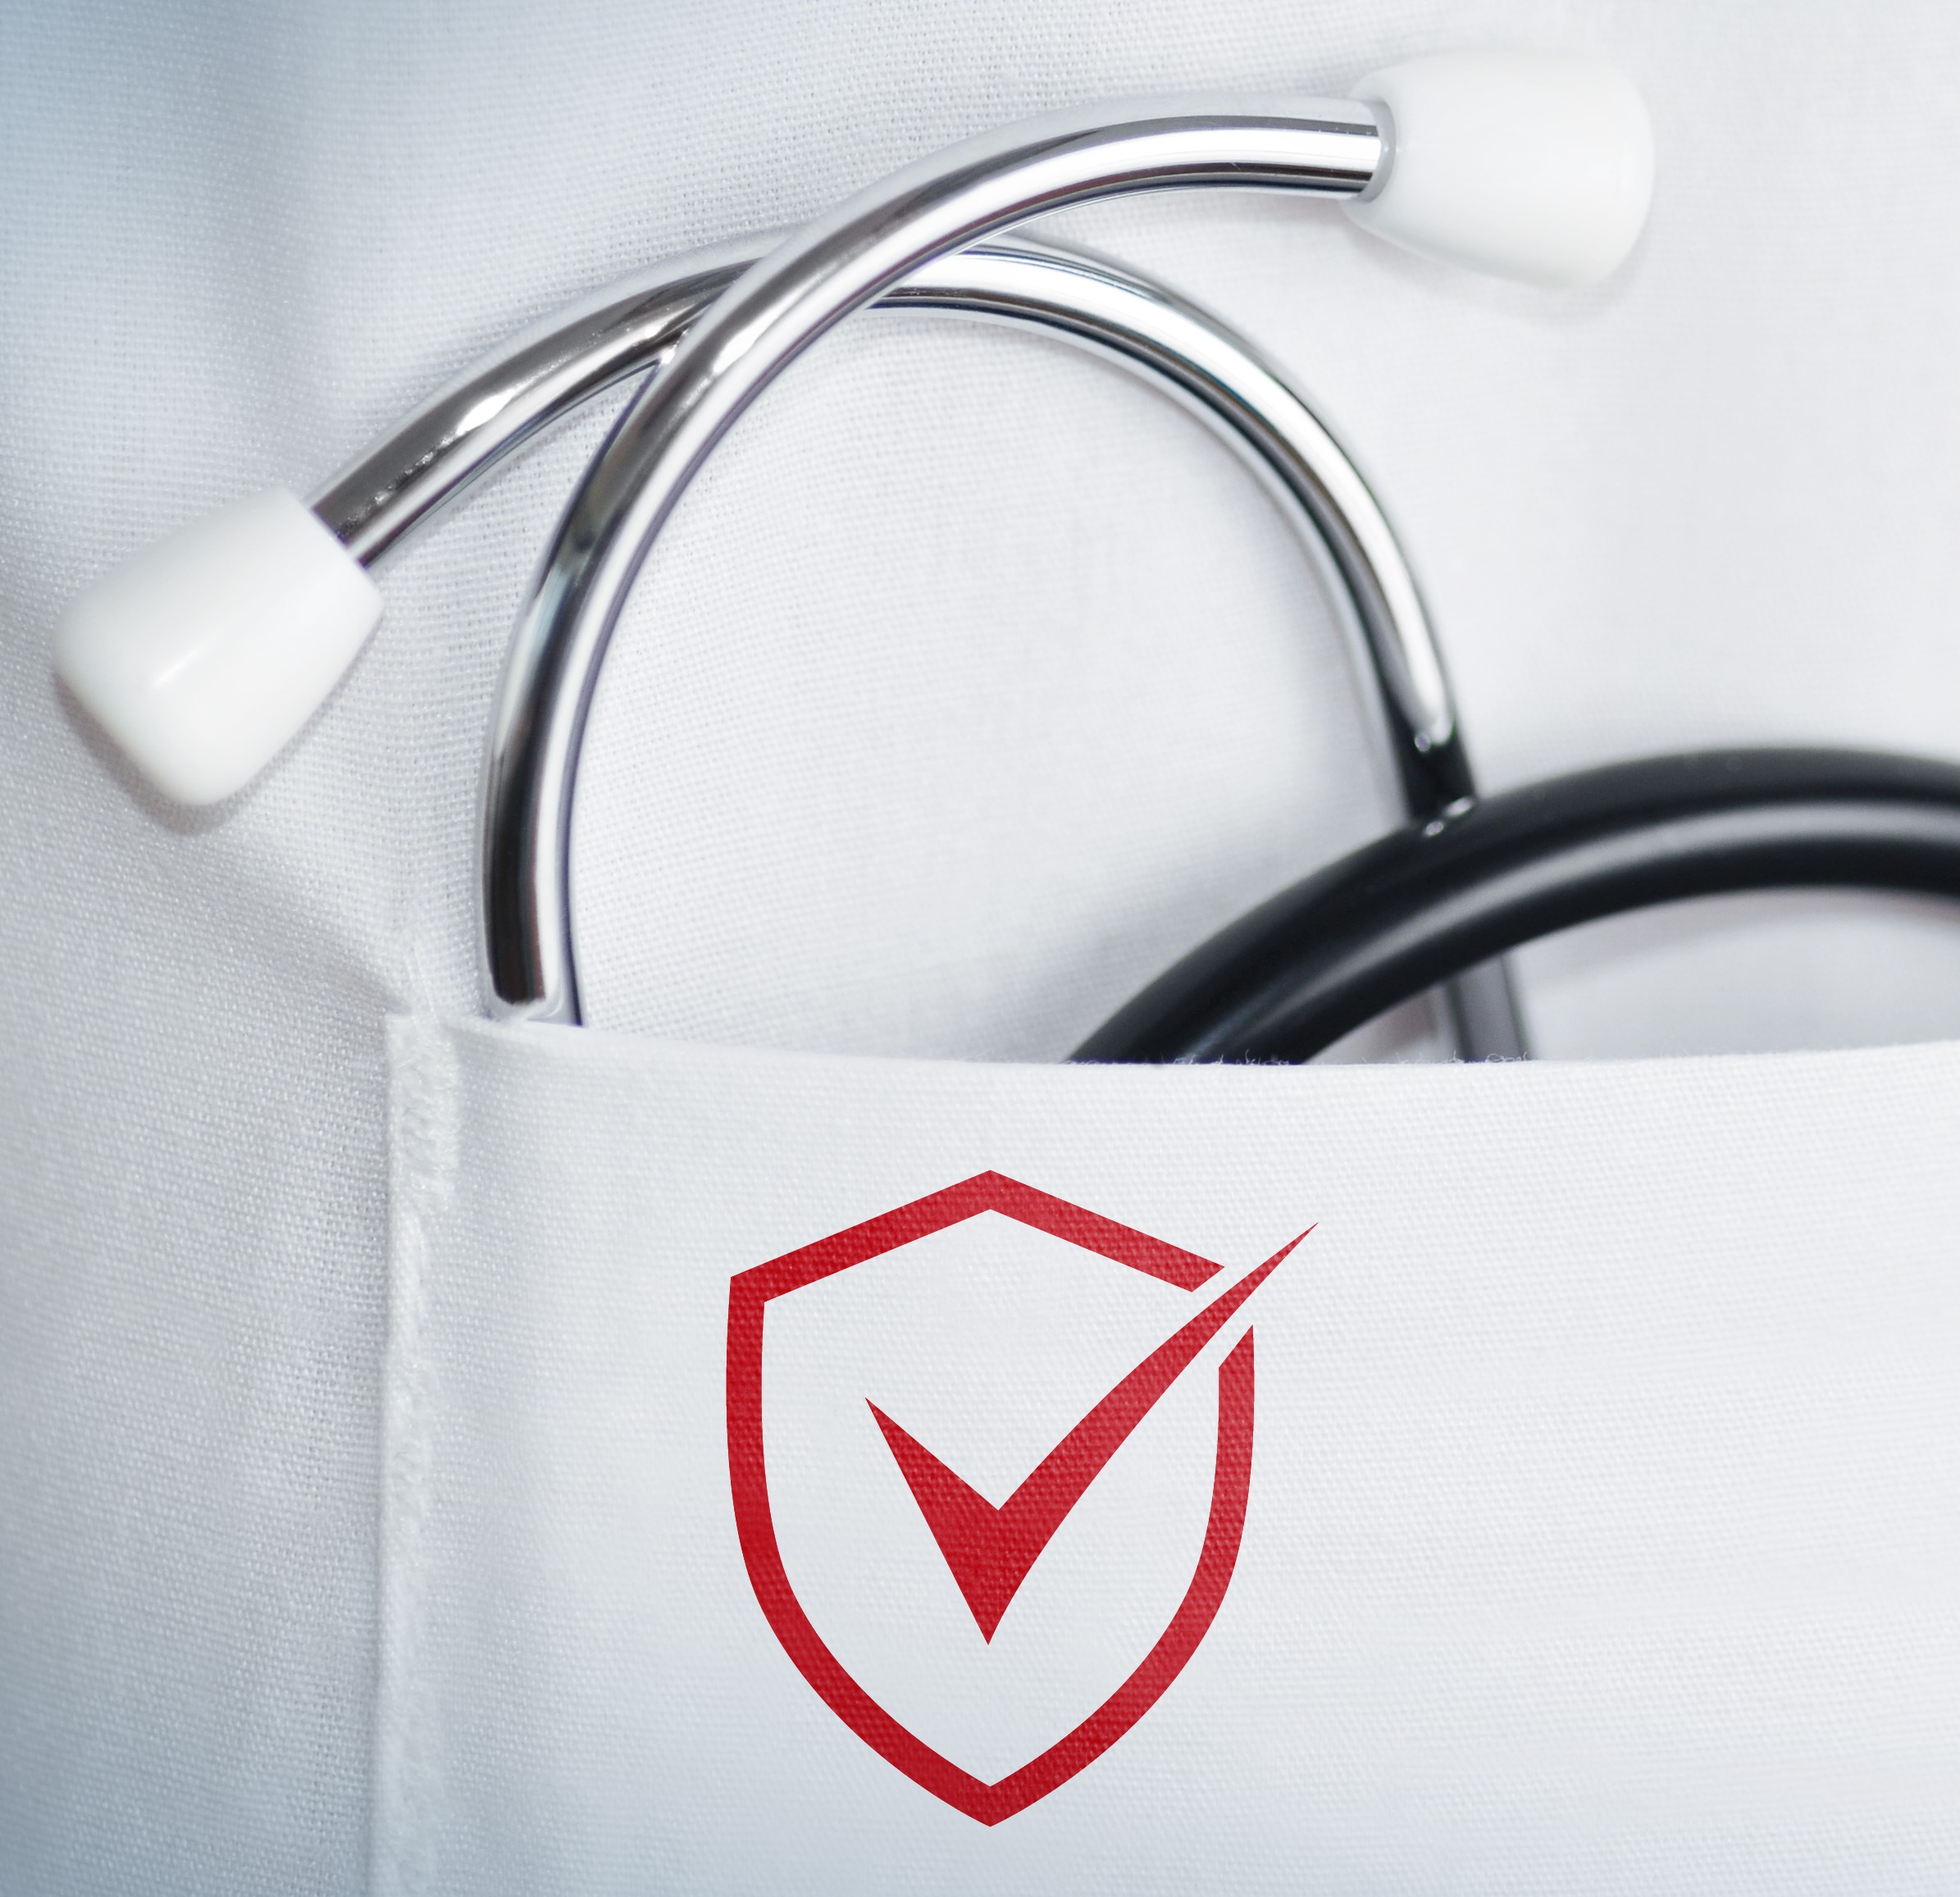 Healthcare - Cybersecurity